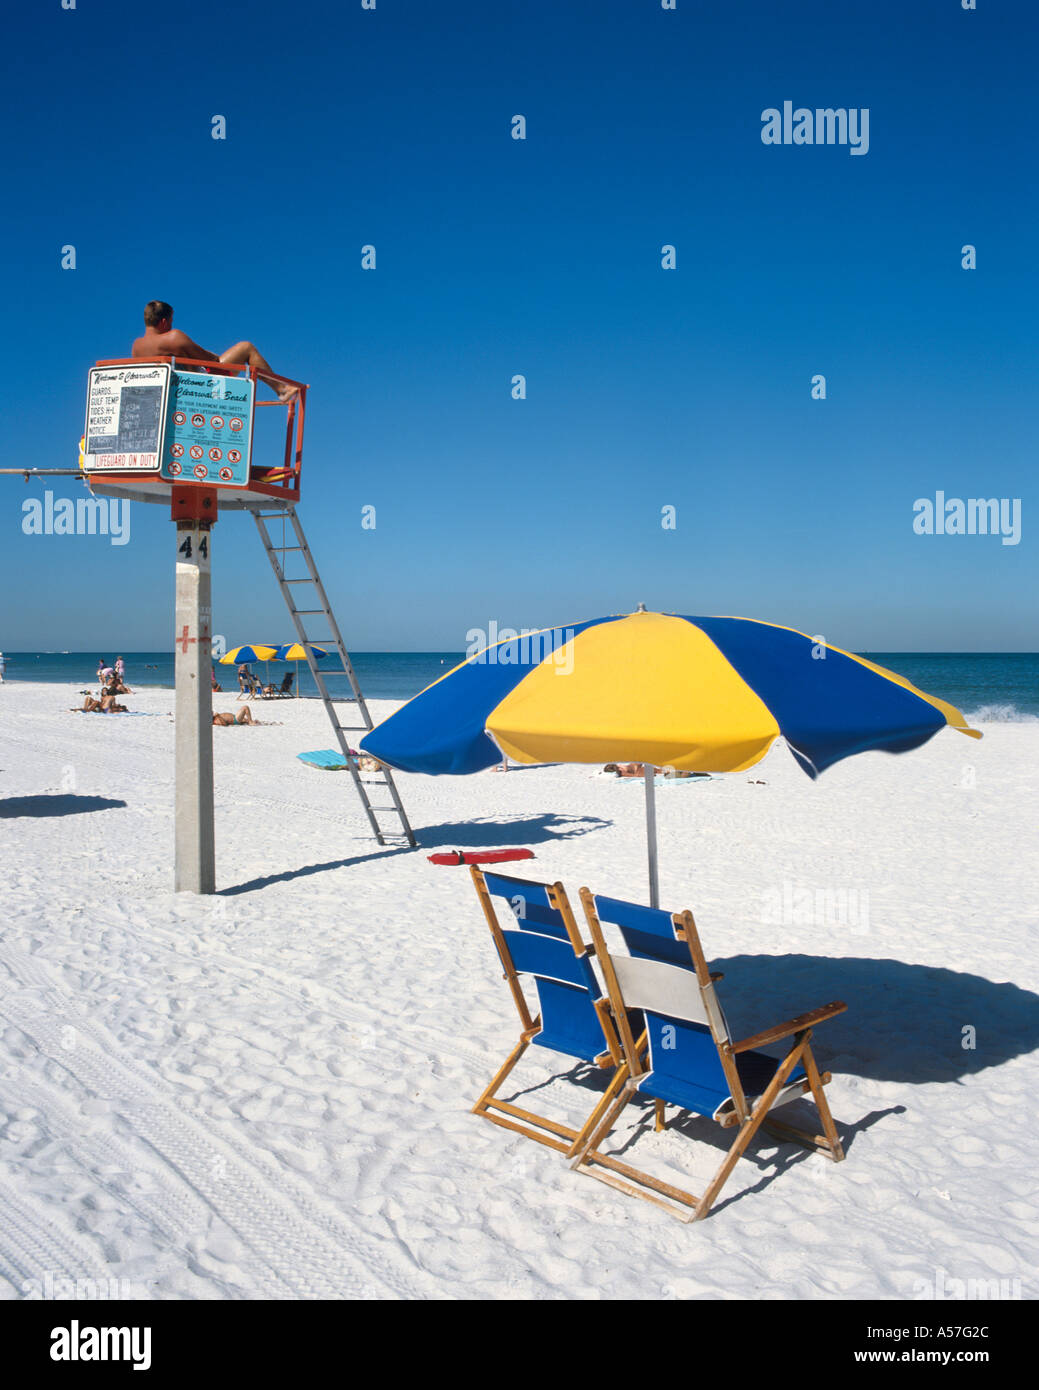 Lifeguard, Clearwater Beach, Florida, USA Banque D'Images